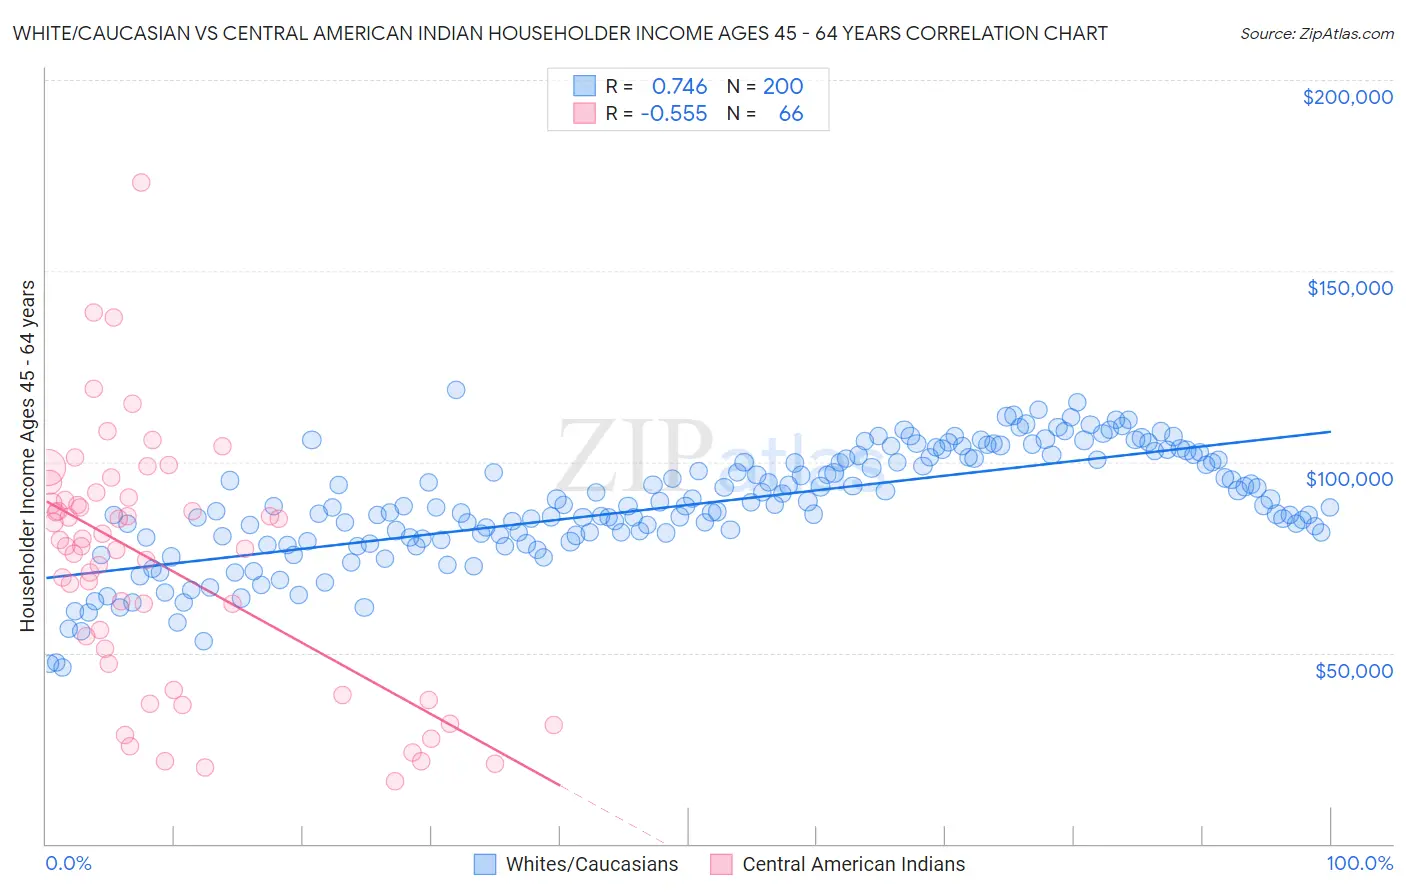 White/Caucasian vs Central American Indian Householder Income Ages 45 - 64 years